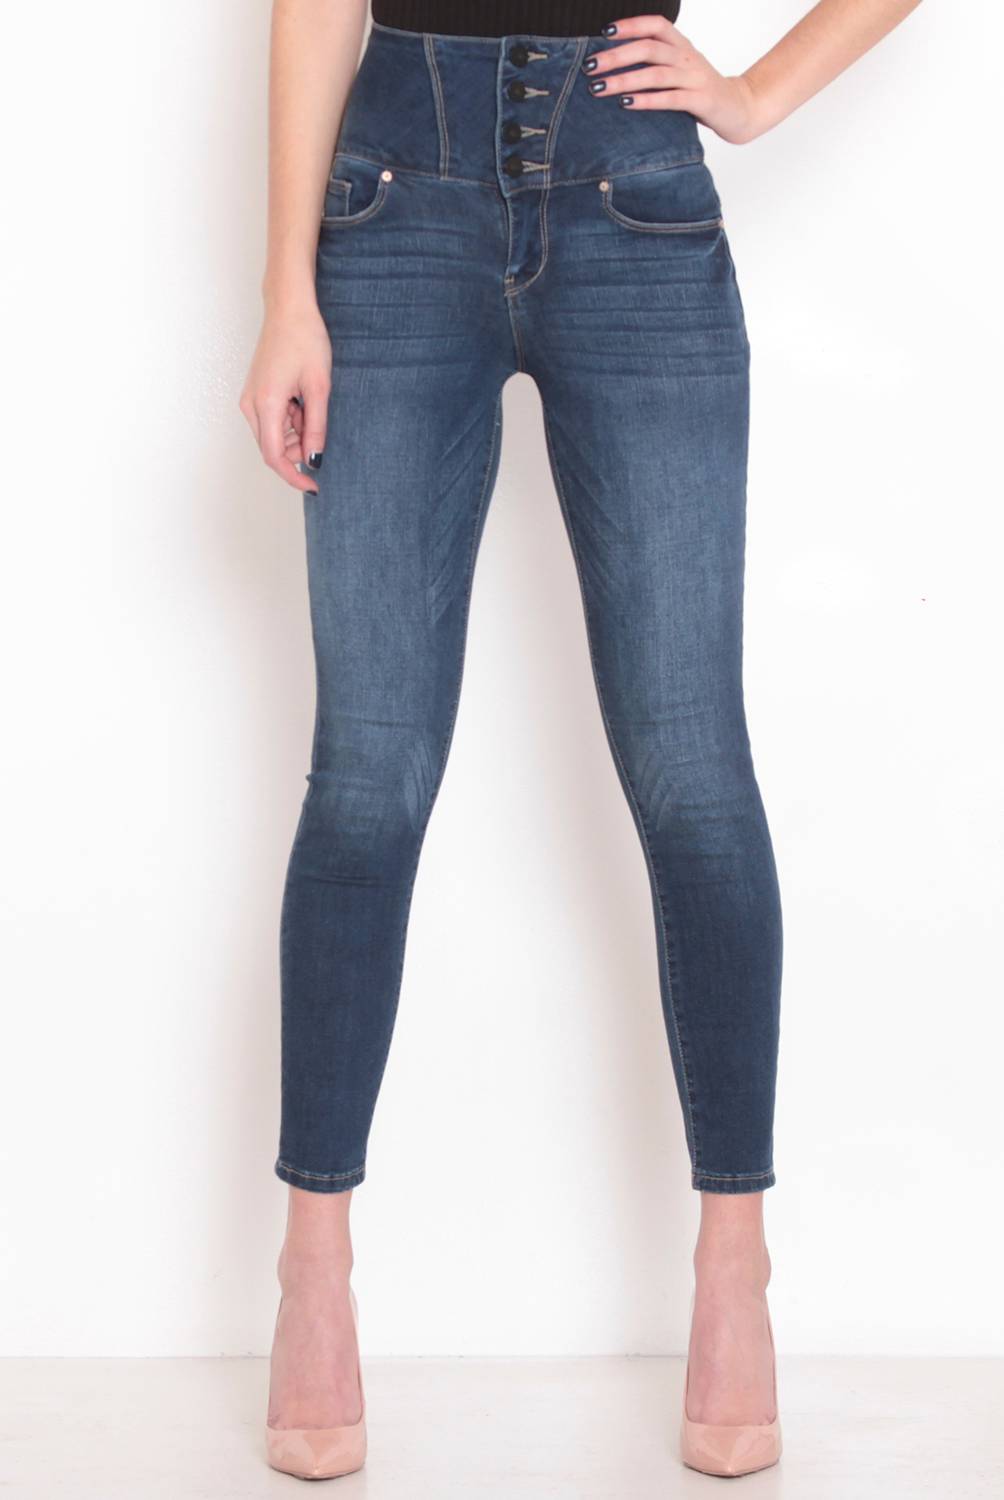 WADOS - Jeans Mujer